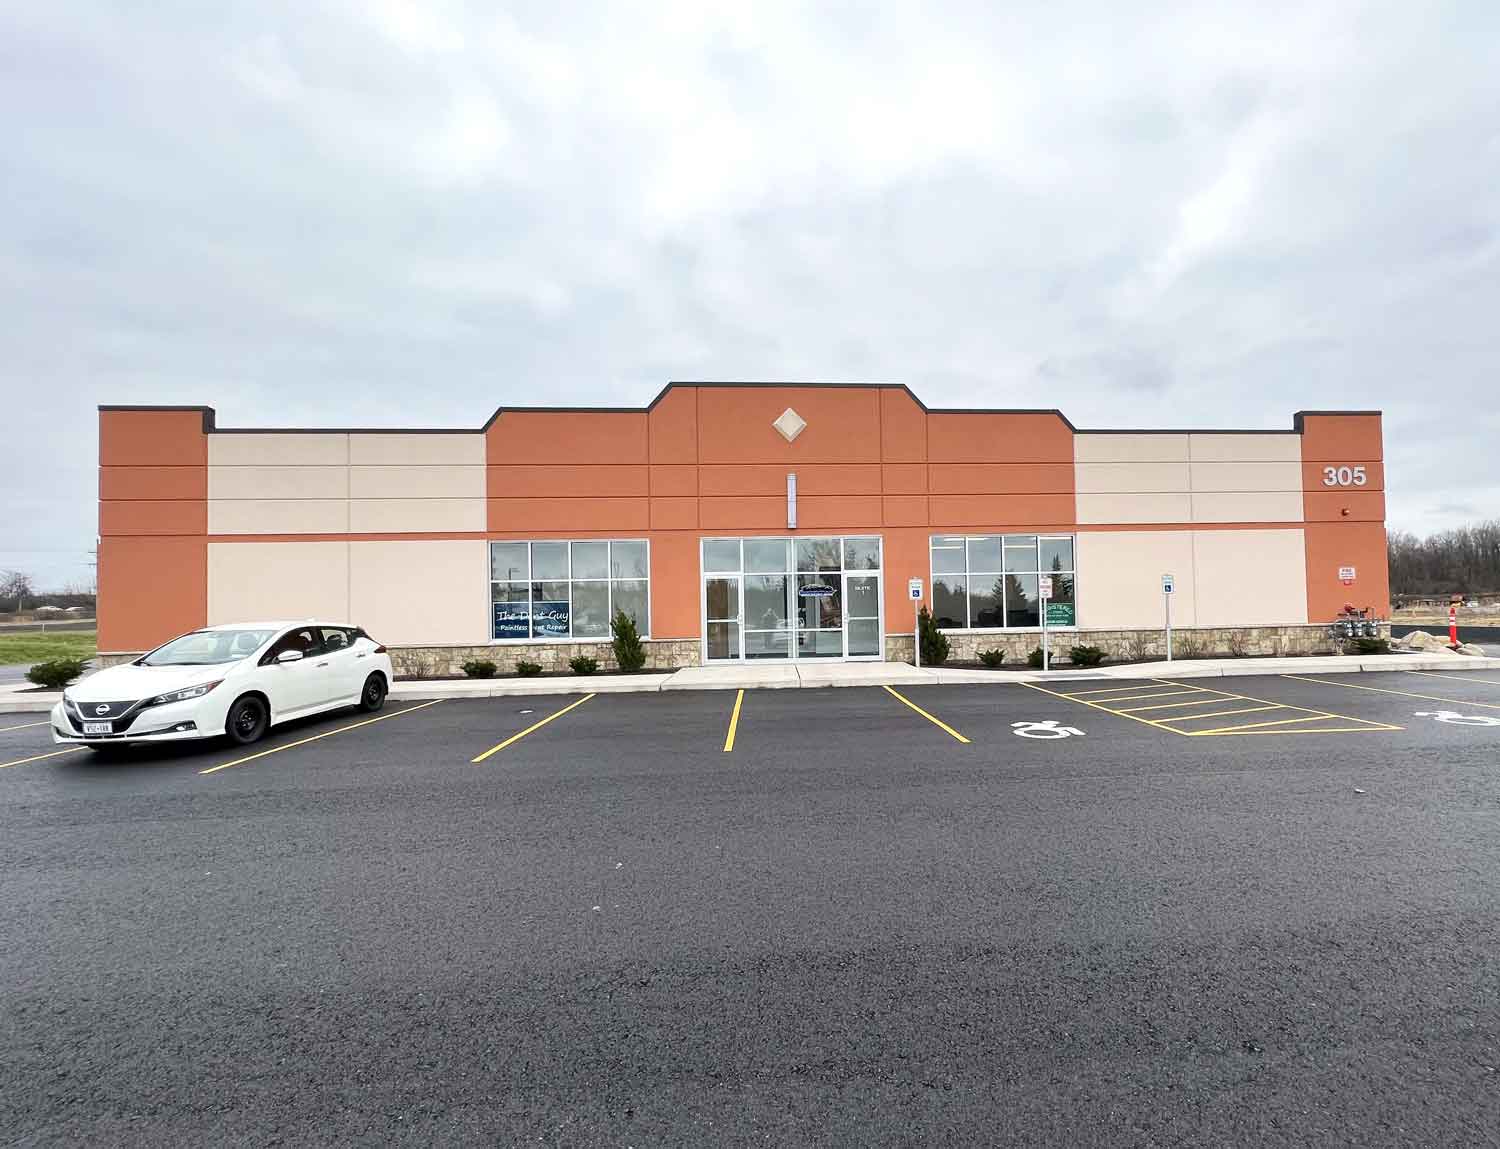 RestorFX Rochester building store front in beige and orange colors with white car parked in front